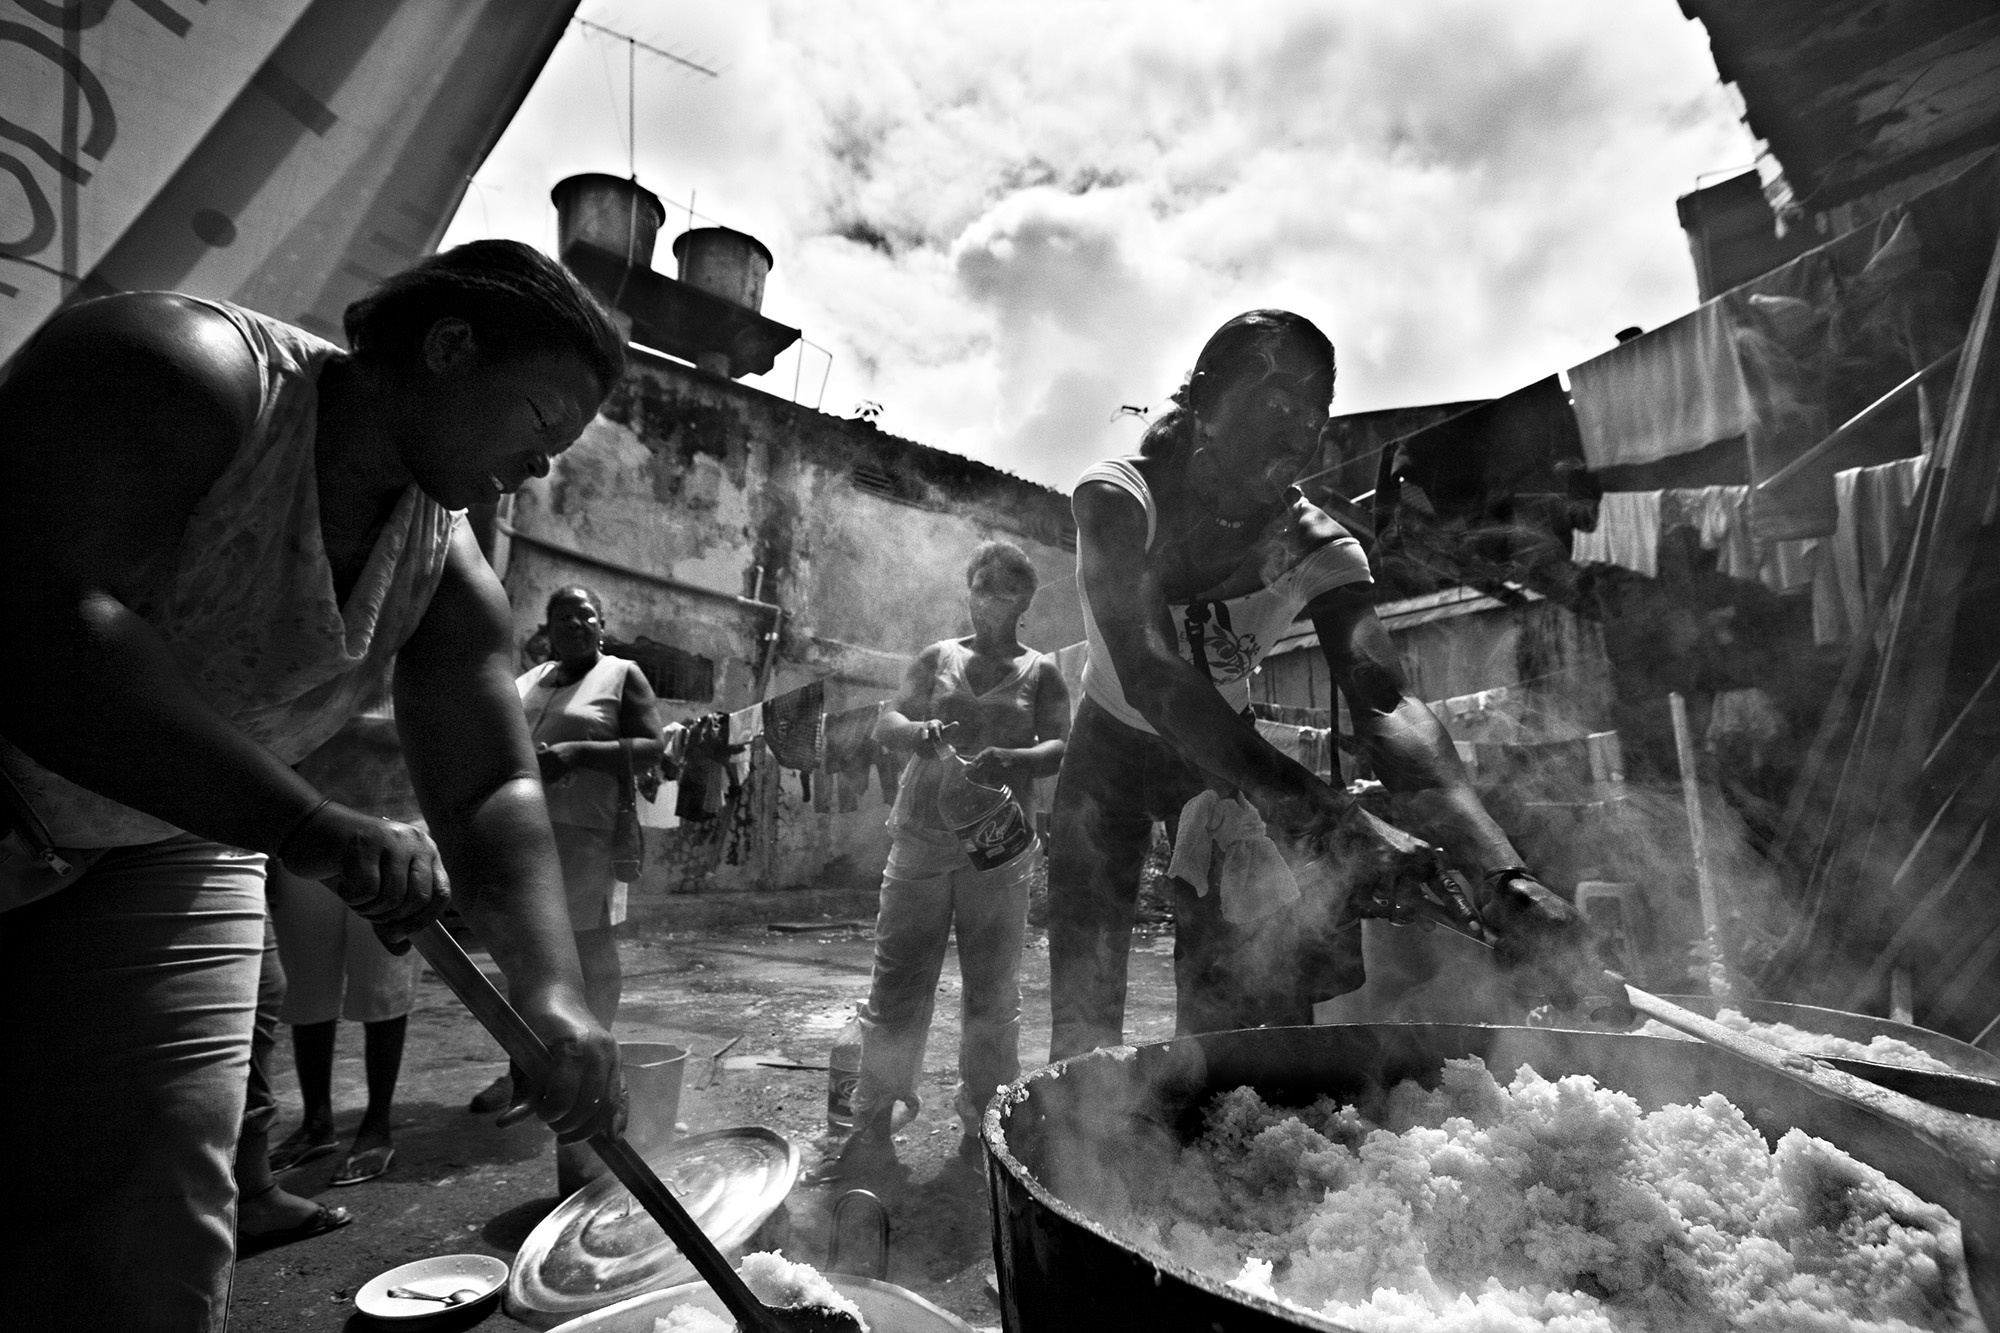 Forced Displacement in Chocó - The communal kitchen was something normal for the people...